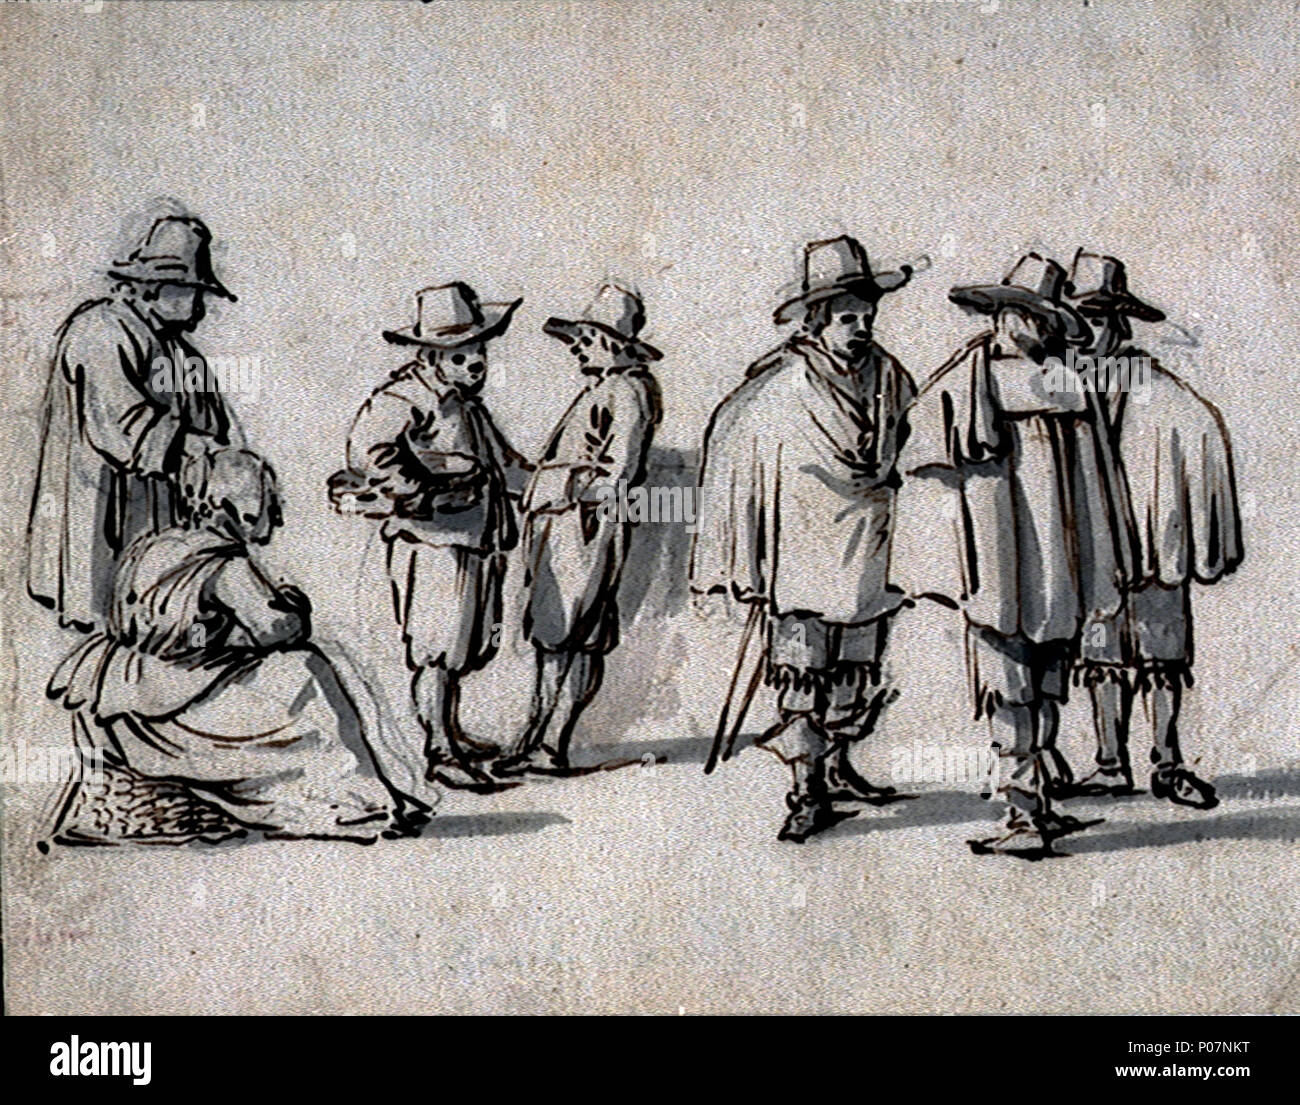 .  English: A group of seven people On the right, three gentlemen in cloaks and wide-brimmed hats are talking to each other. On the left, a woman is seated on a basket; a man is standing by her. In the background two men are engaged in conversation. The unsigned drawing has been attributed to Willem van de Velde, the Elder, as indicated by an old inscription on the back: 'Wm Vandevelt'. Its stylistic resemblance to drawings of similar subjects from the Milford Collection, now at the NMM, suggest a tentative date of about 1655. A group of seven people  . circa 1655. Willem Van de Velde, the Eld Stock Photo